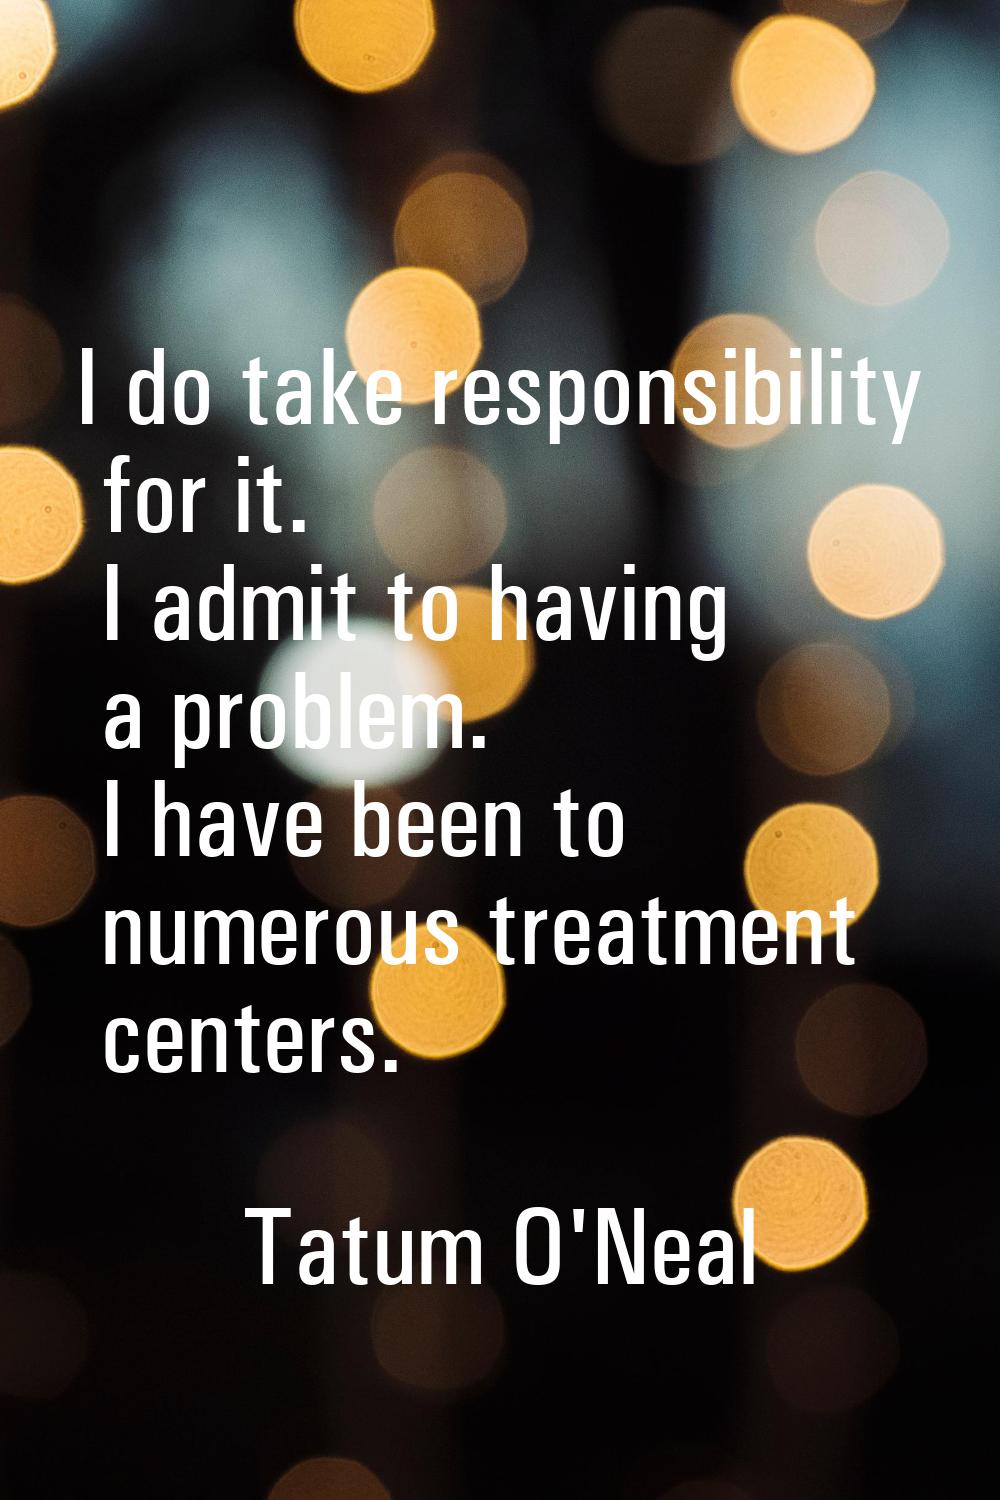 I do take responsibility for it. I admit to having a problem. I have been to numerous treatment cen